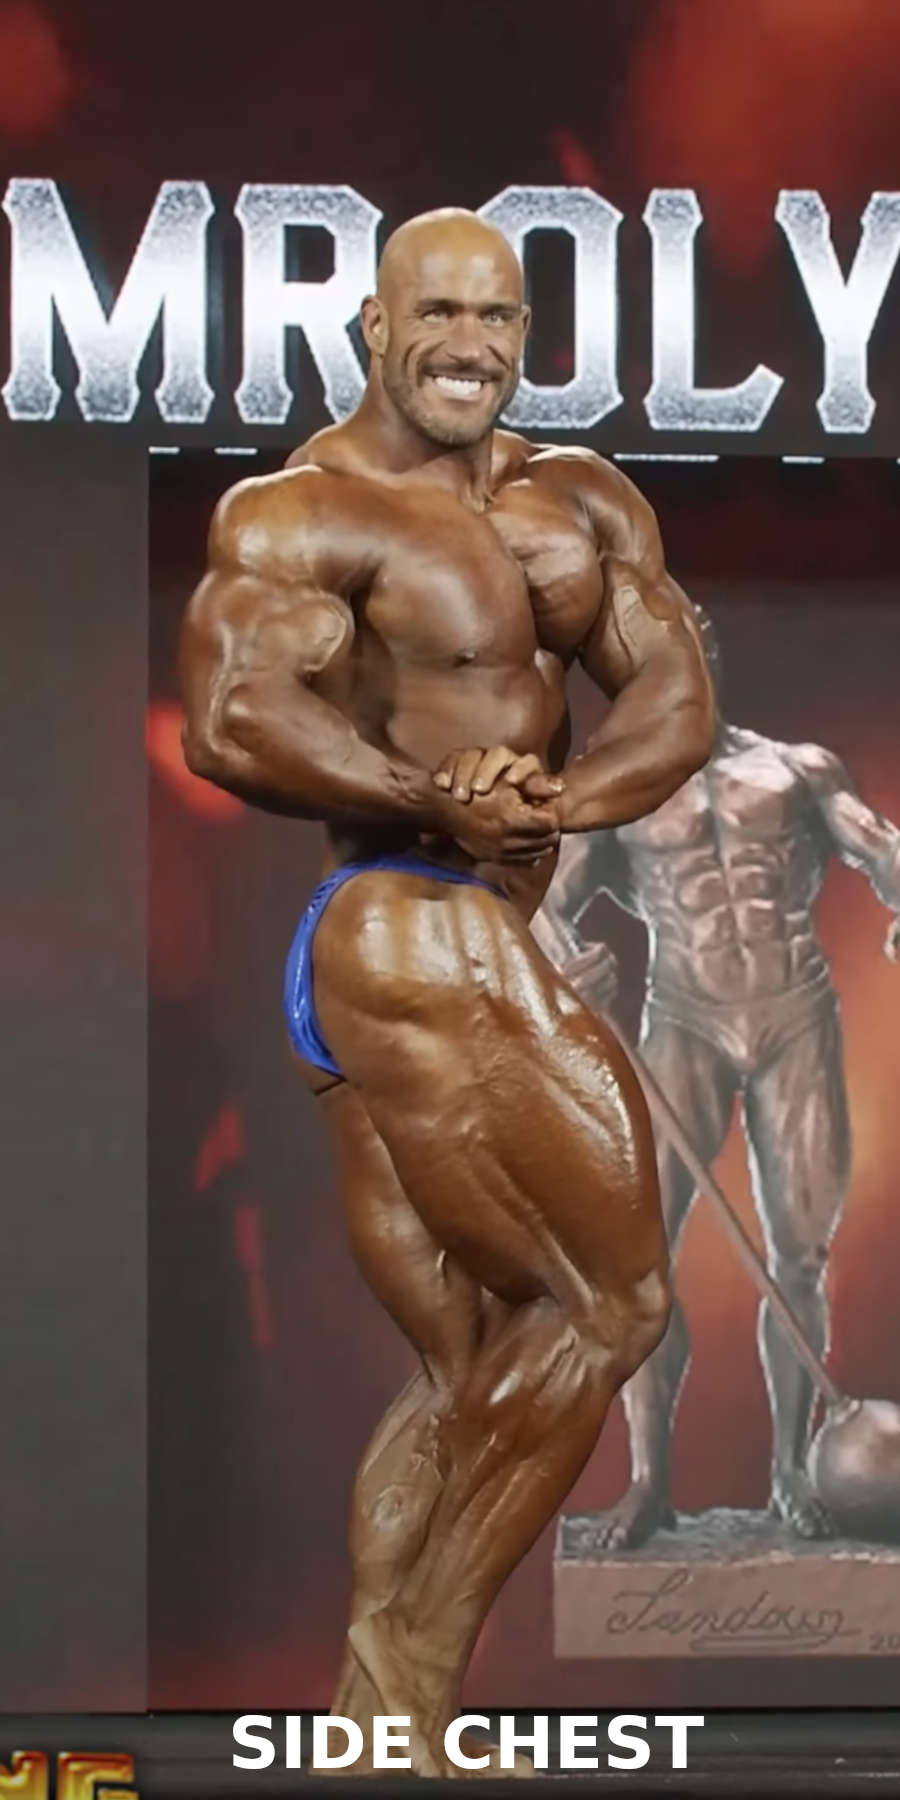 A bodybuilder performing the side chest pose on stage during a bodybuilding competition 